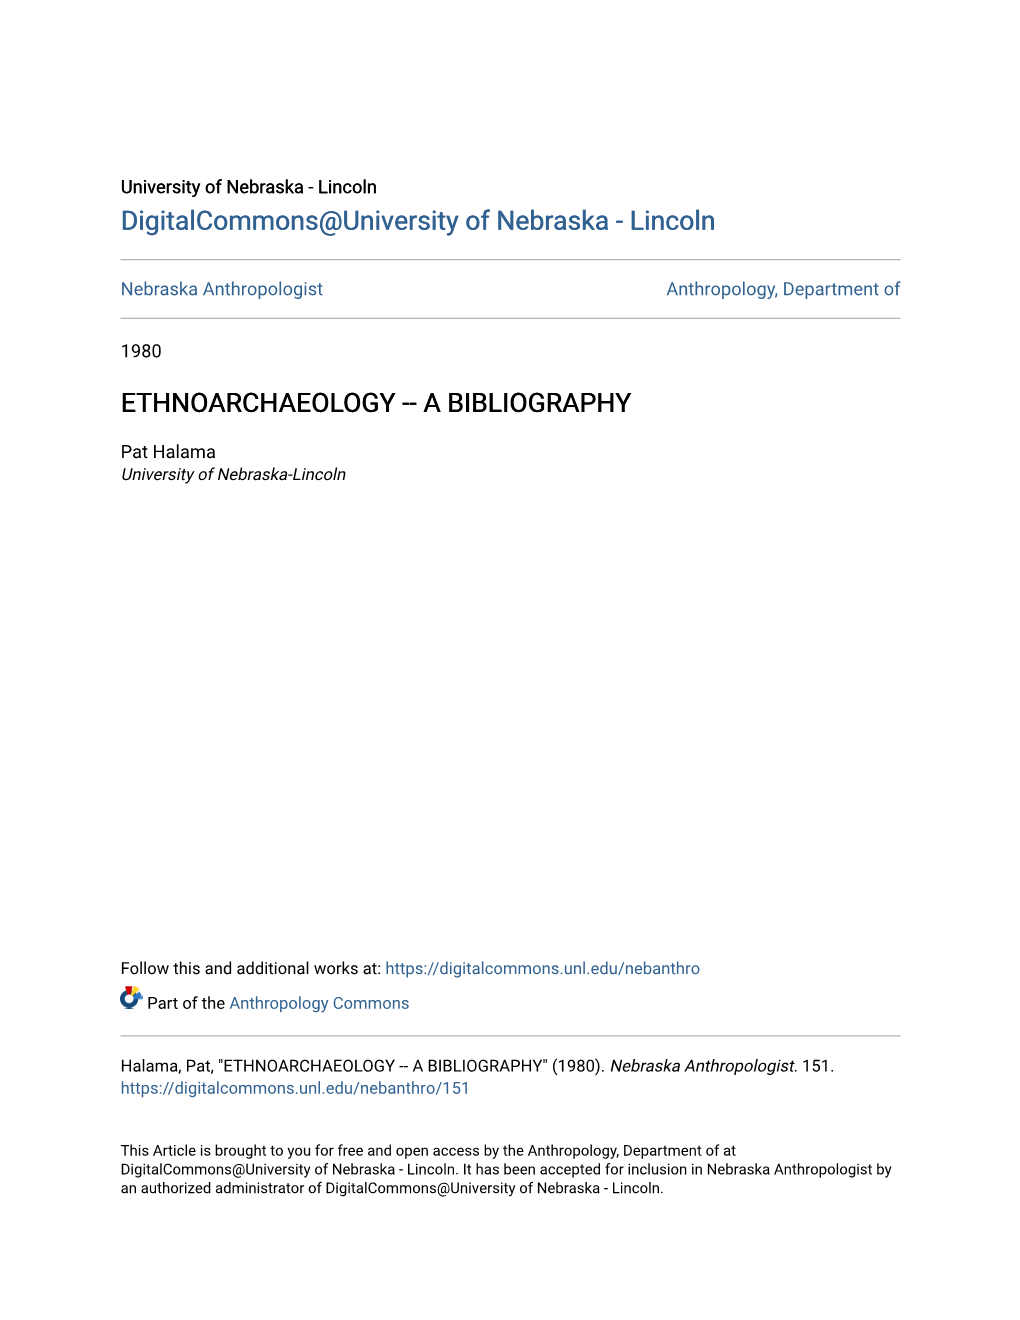 Ethnoarchaeology -- a Bibliography